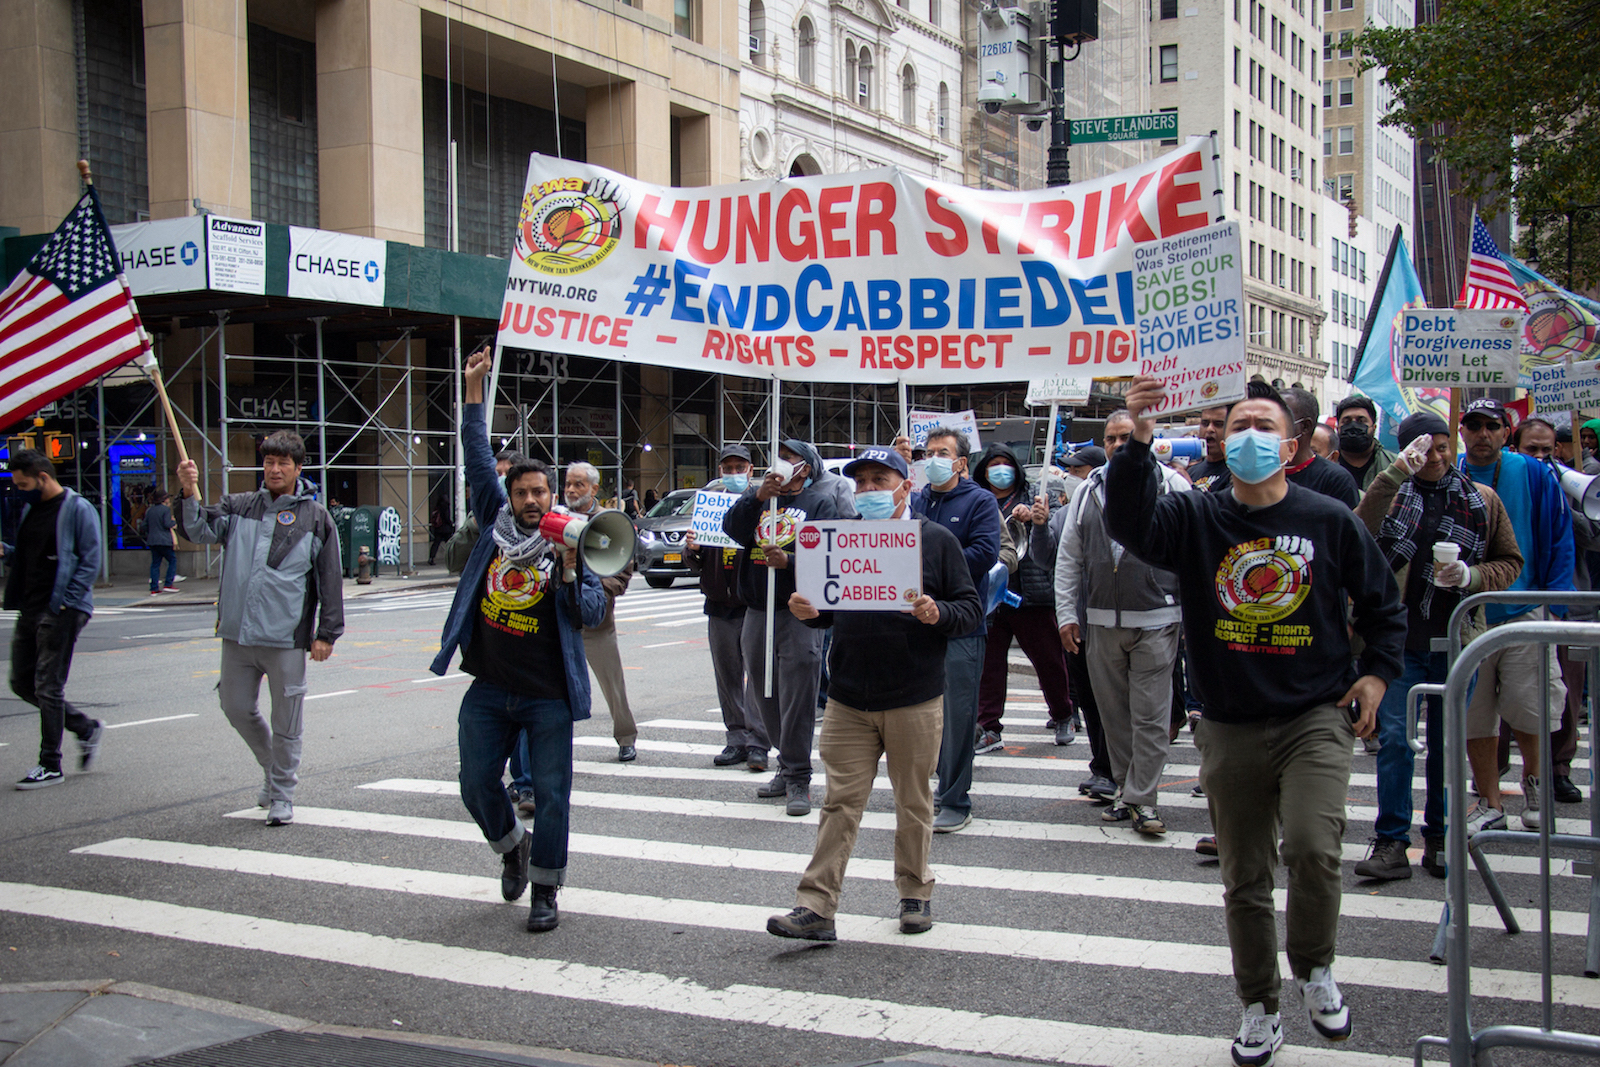 A group of people march on a city street holding protest signs. The biggest one reads "Hunger Strike: #EndCabbieDebt." Many of the marchers wear matching sweatshirts with the logo of the New York Taxi Workers Alliance.